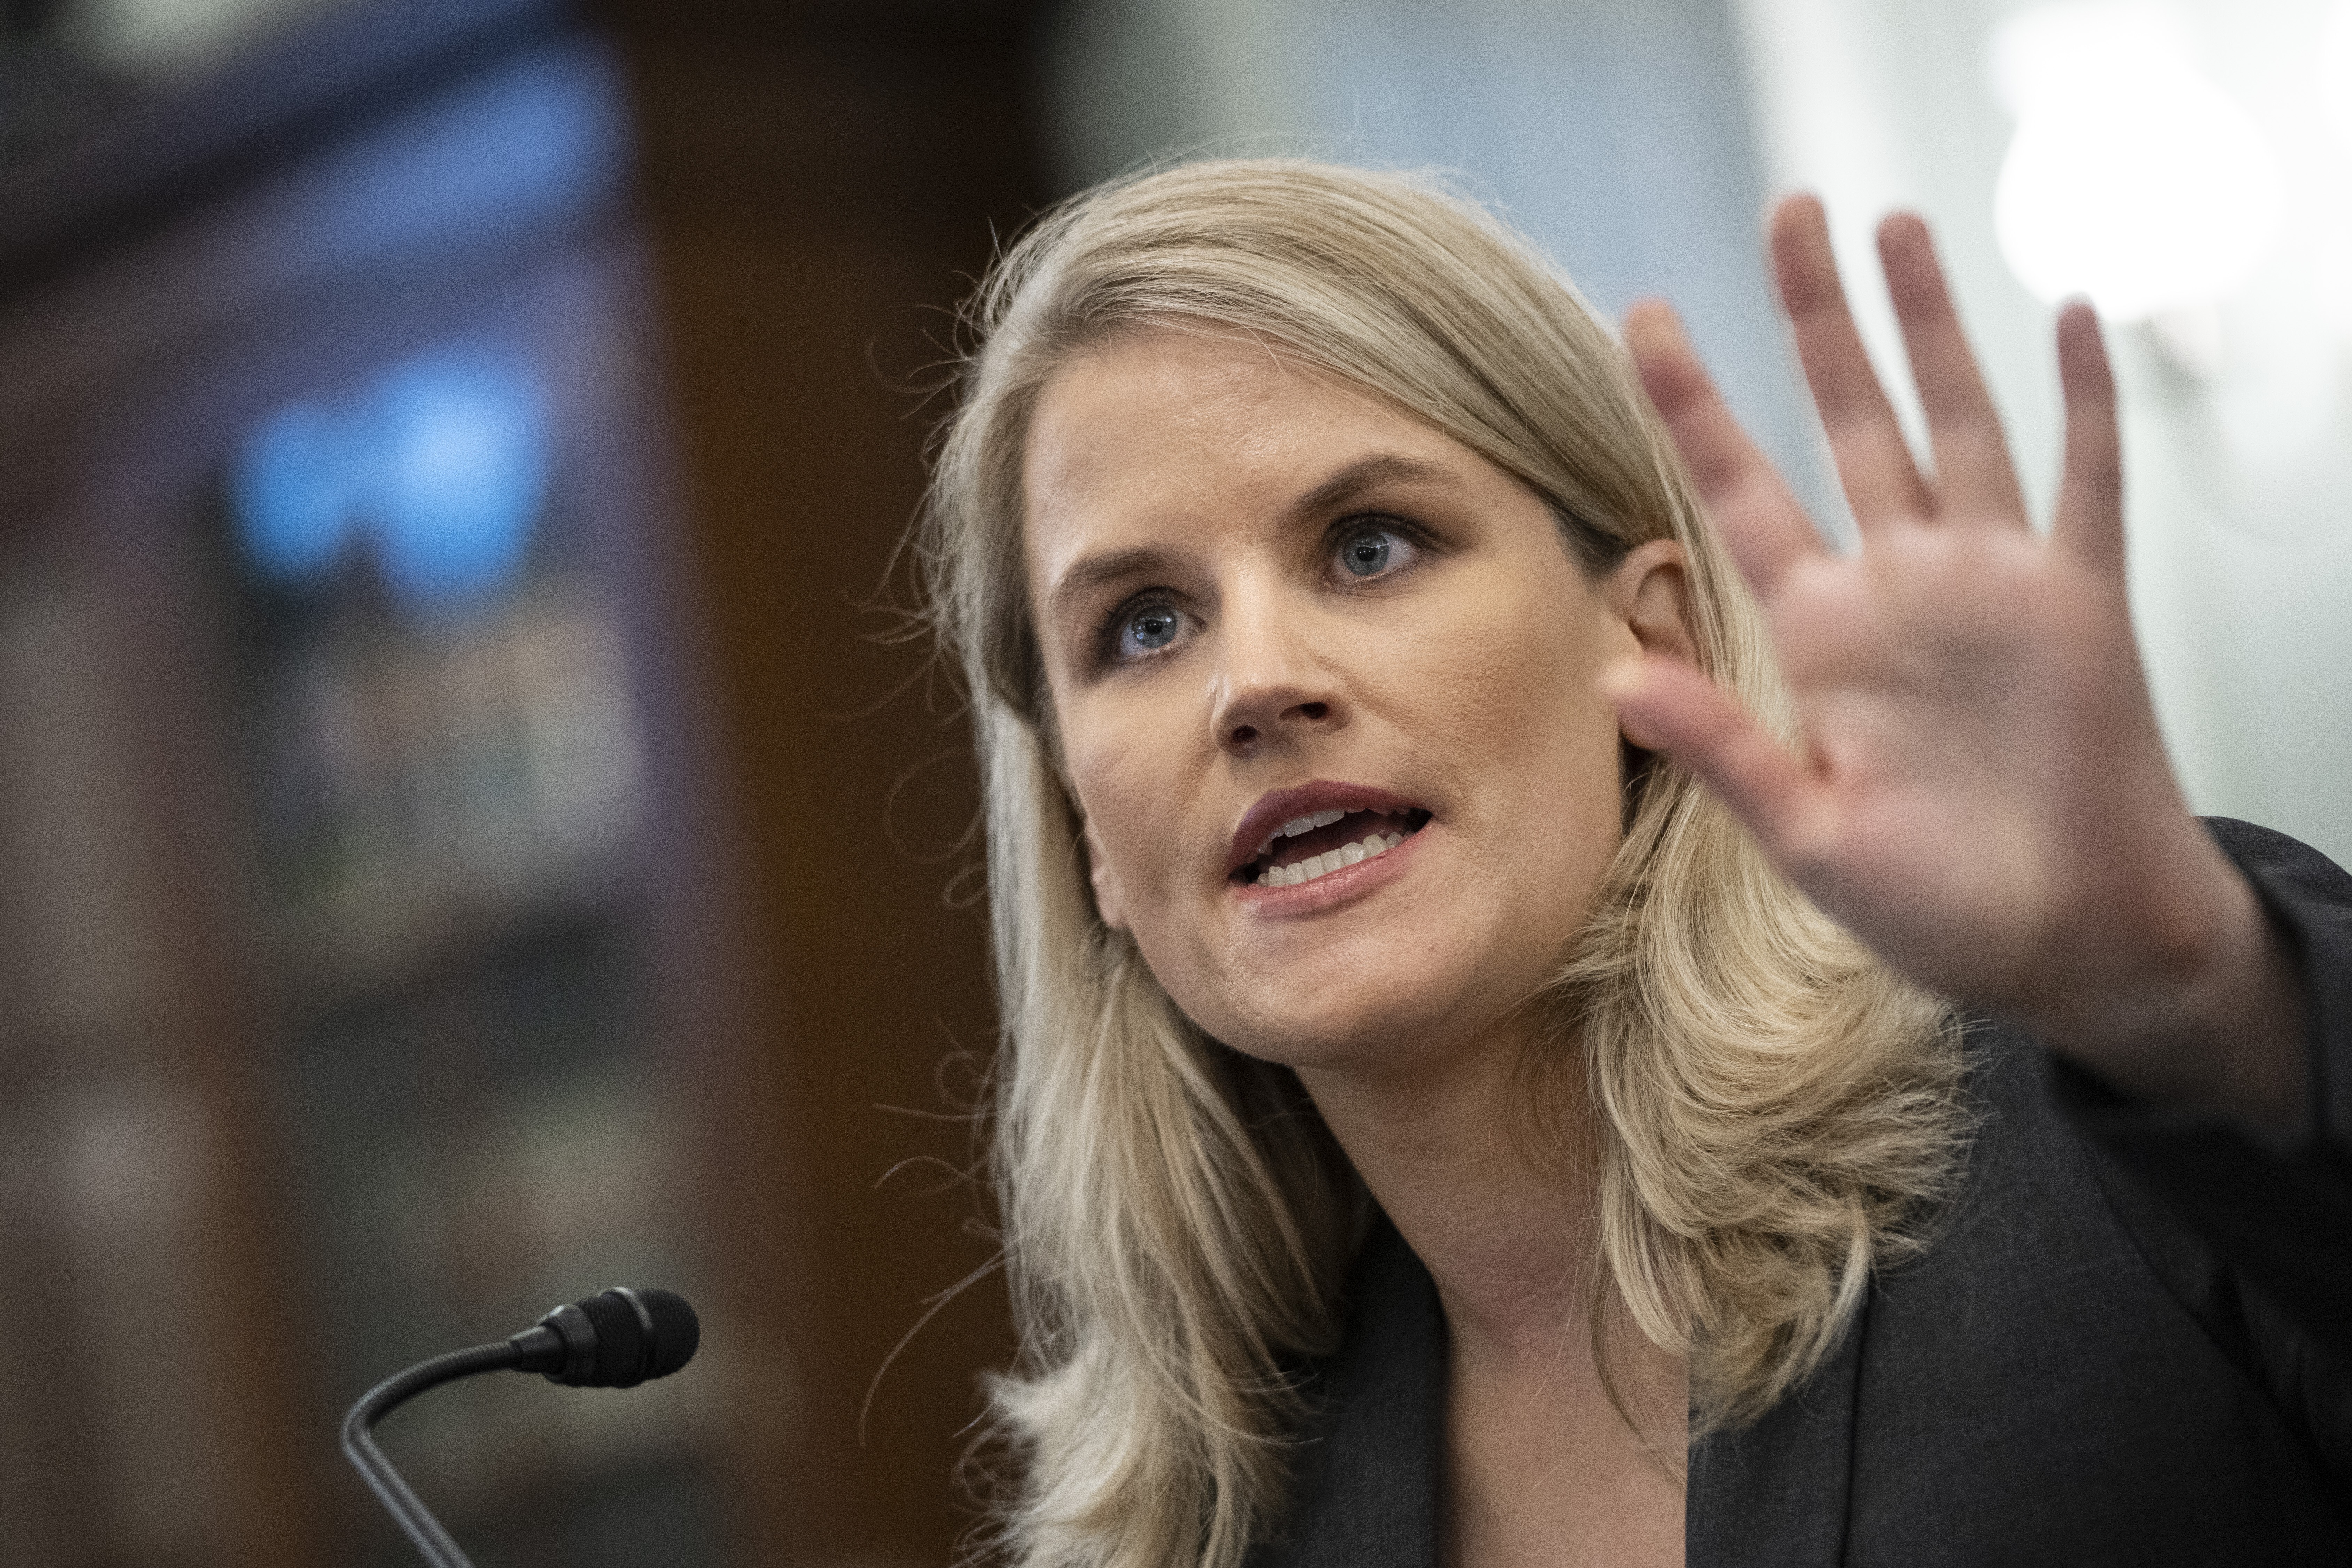 Frances Haugen, Facebook whistle-blower, speaks during a Senate Commerce, Science and Transportation Subcommittee hearing in Washington on Tuesday. Photo: Bloomberg